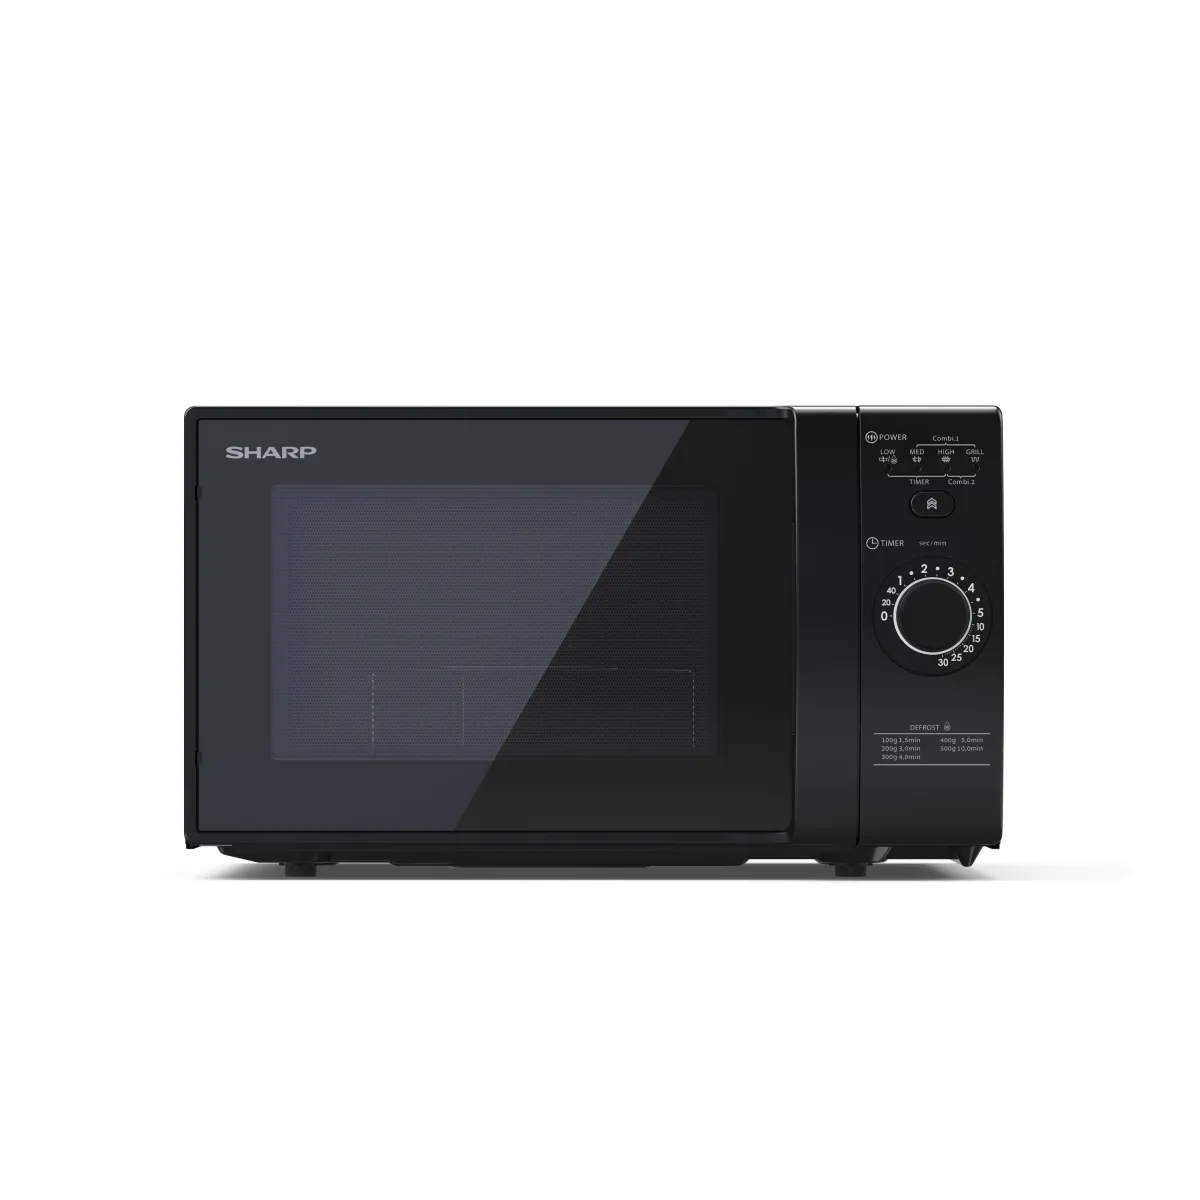 Samsung MS23K3513AW/EG forno a microonde Superficie piana Solo microonde 23  L 800 W Bianco (MS23K3513AW/